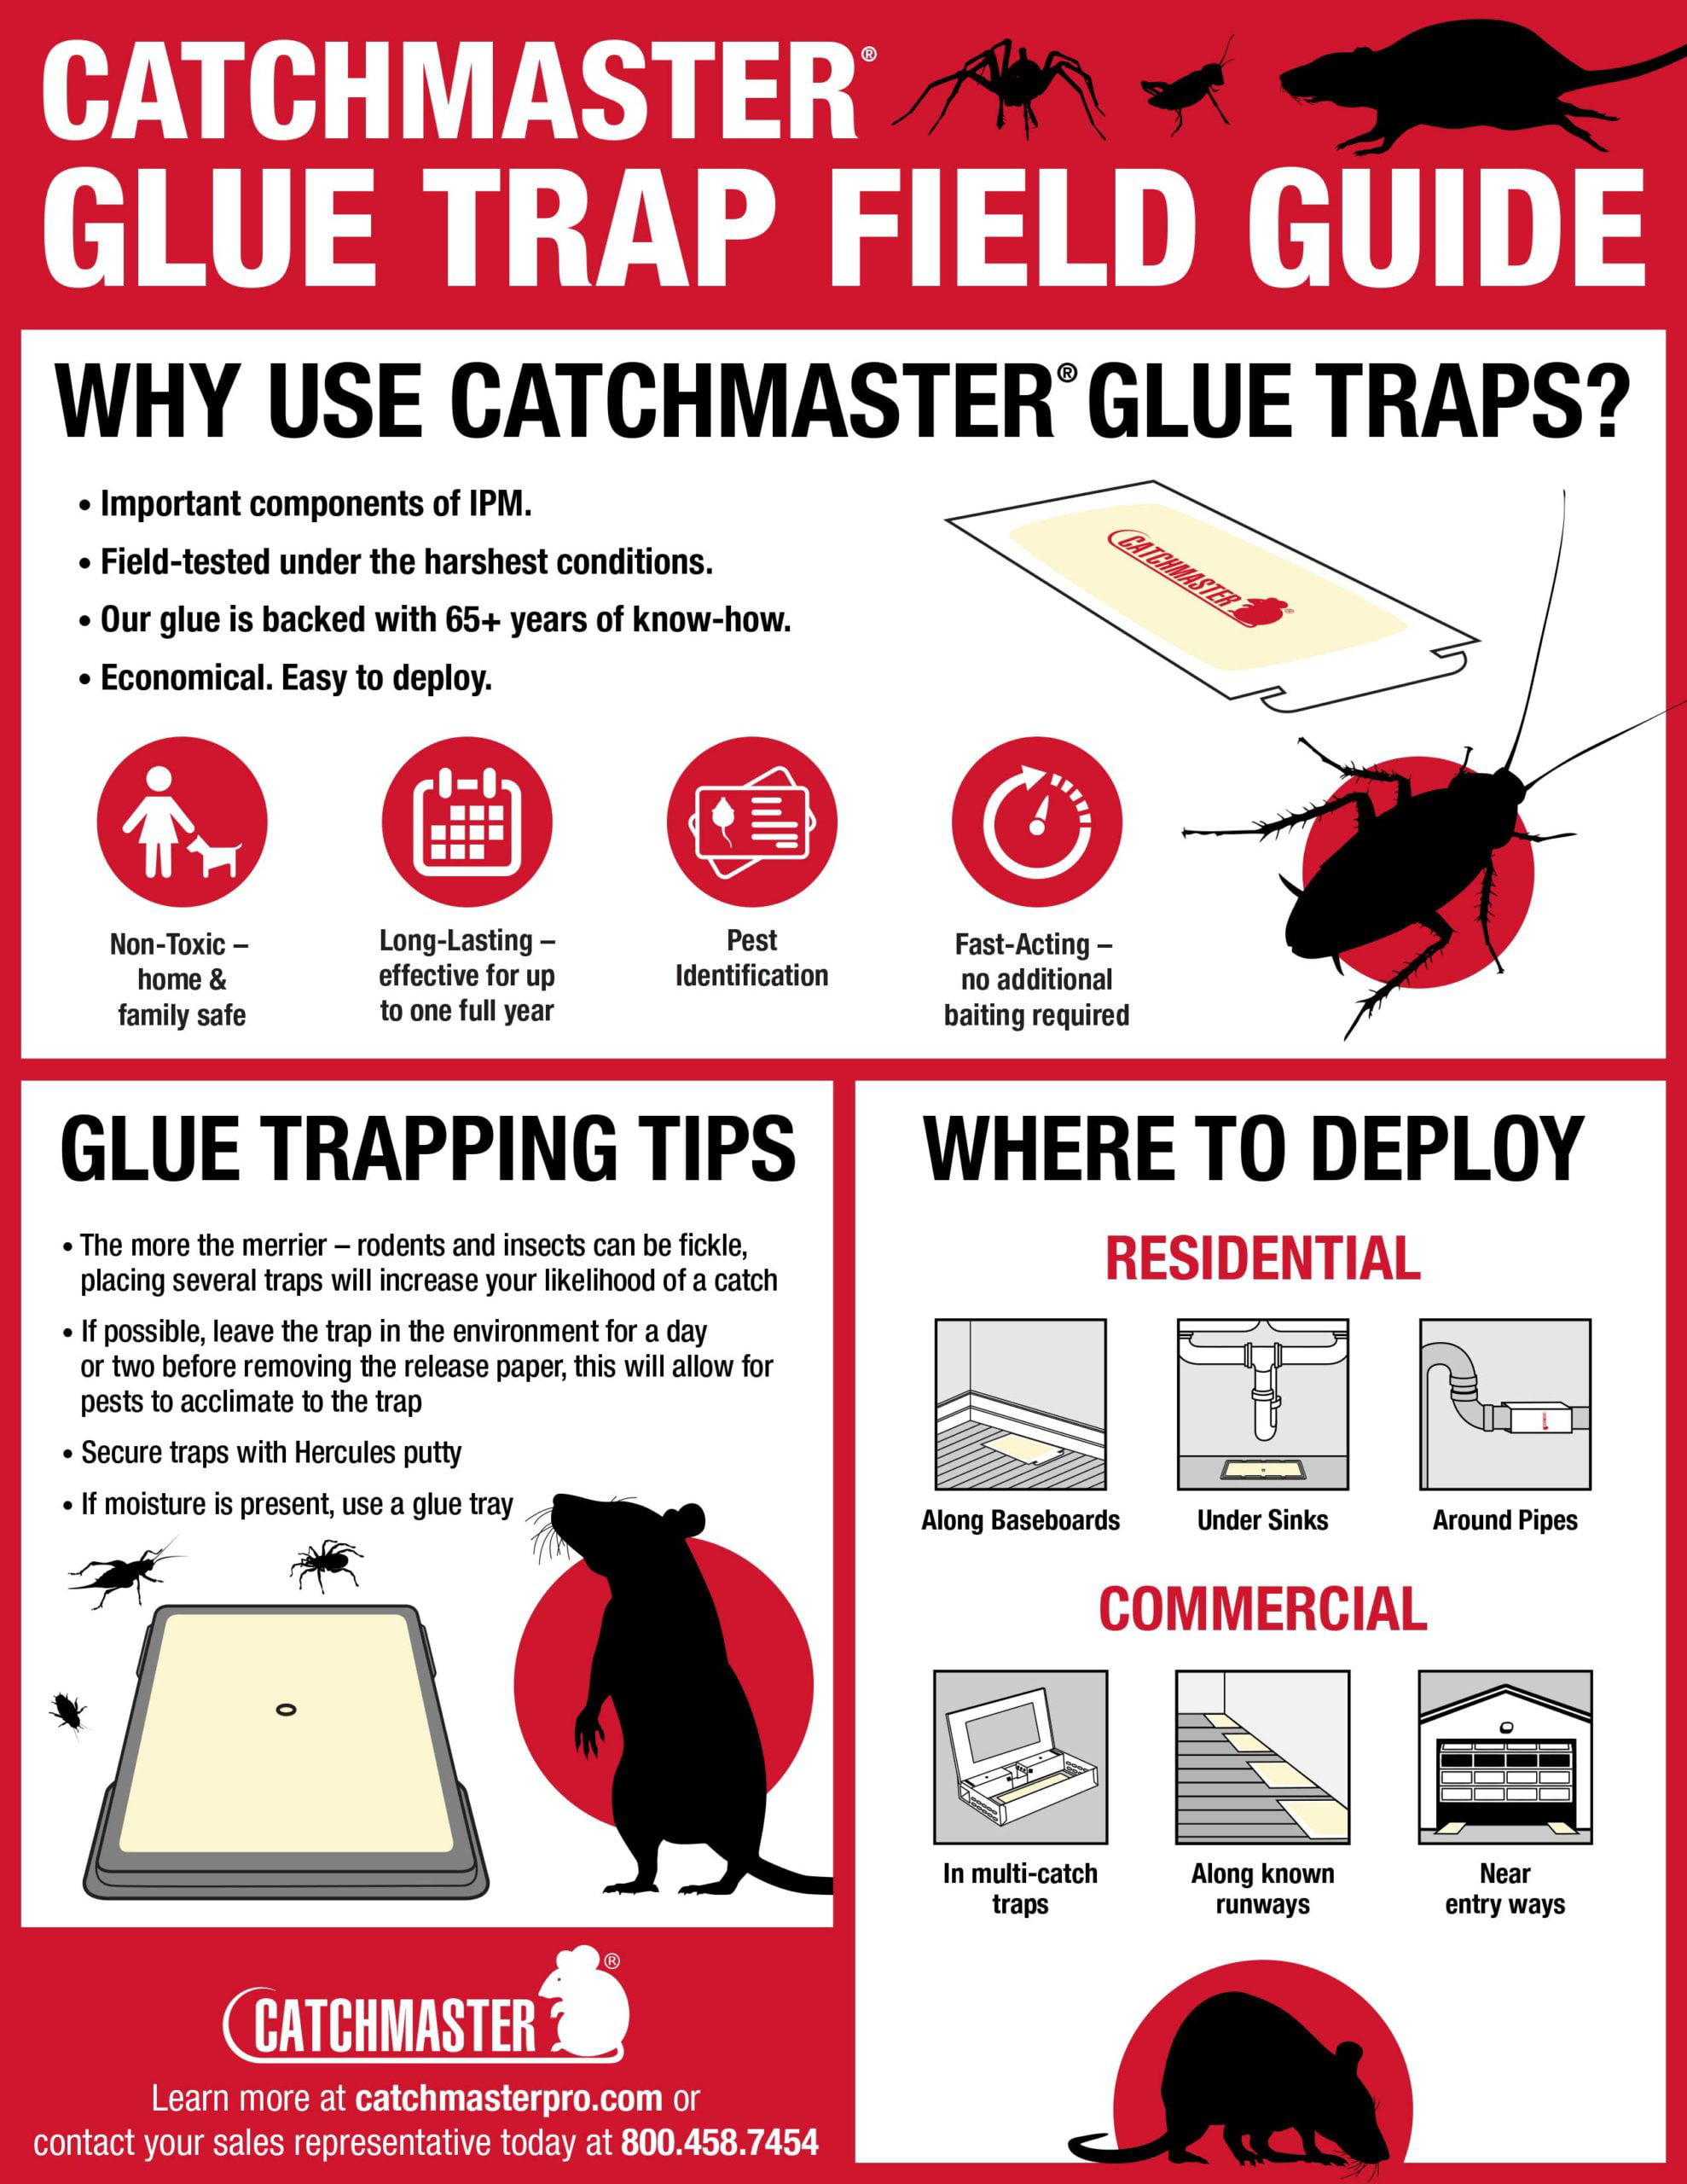 Catchmaster 30R Rat Size Glue Boards 30/Pack